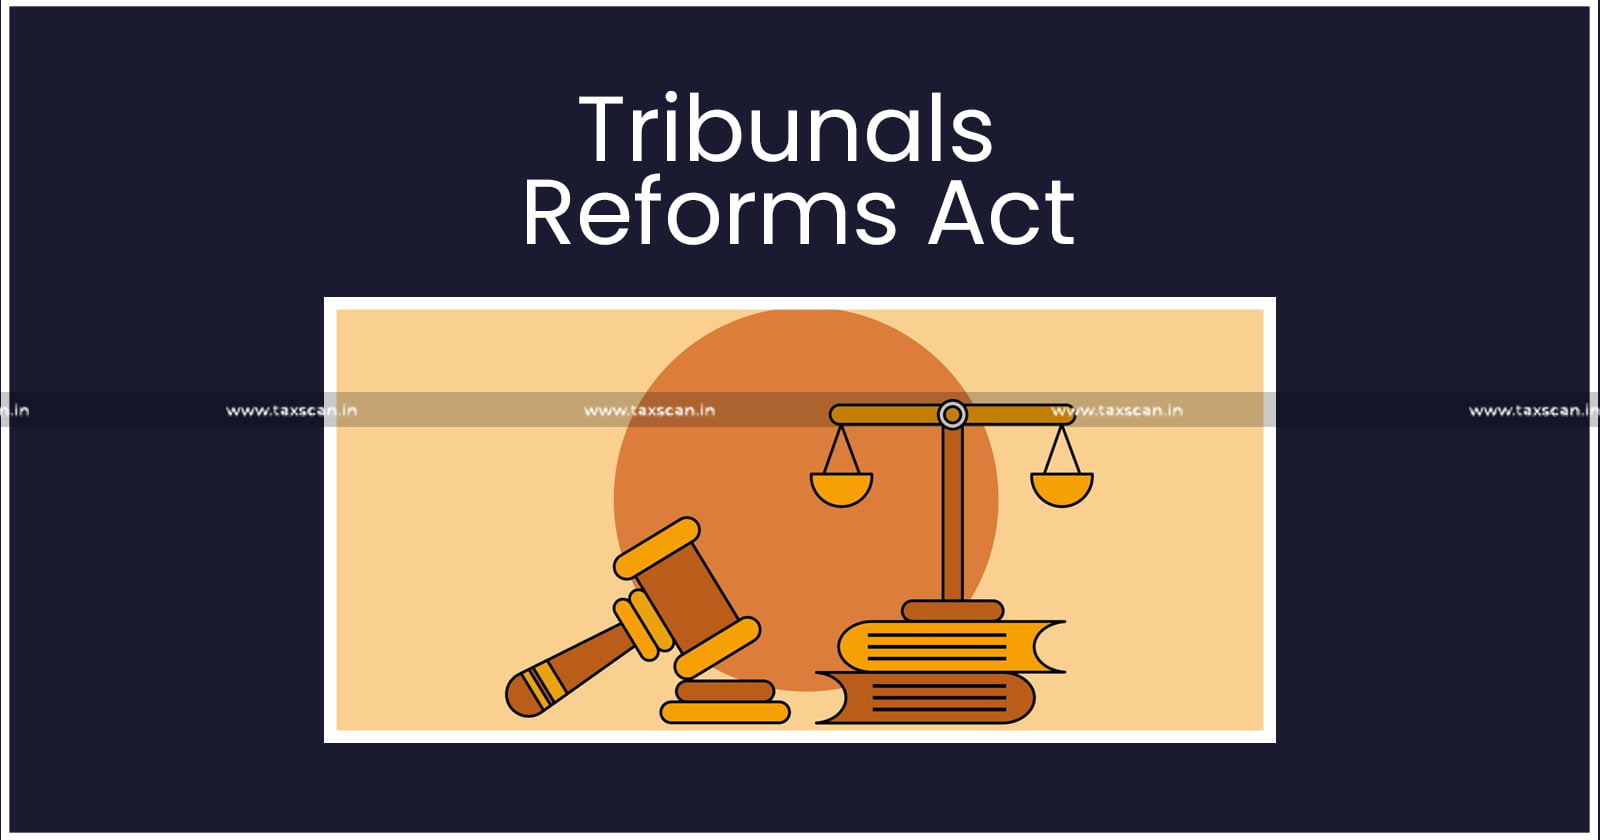 Central Government Notifies - Amendment to Tribunals Reforms Act - TAXSCAN